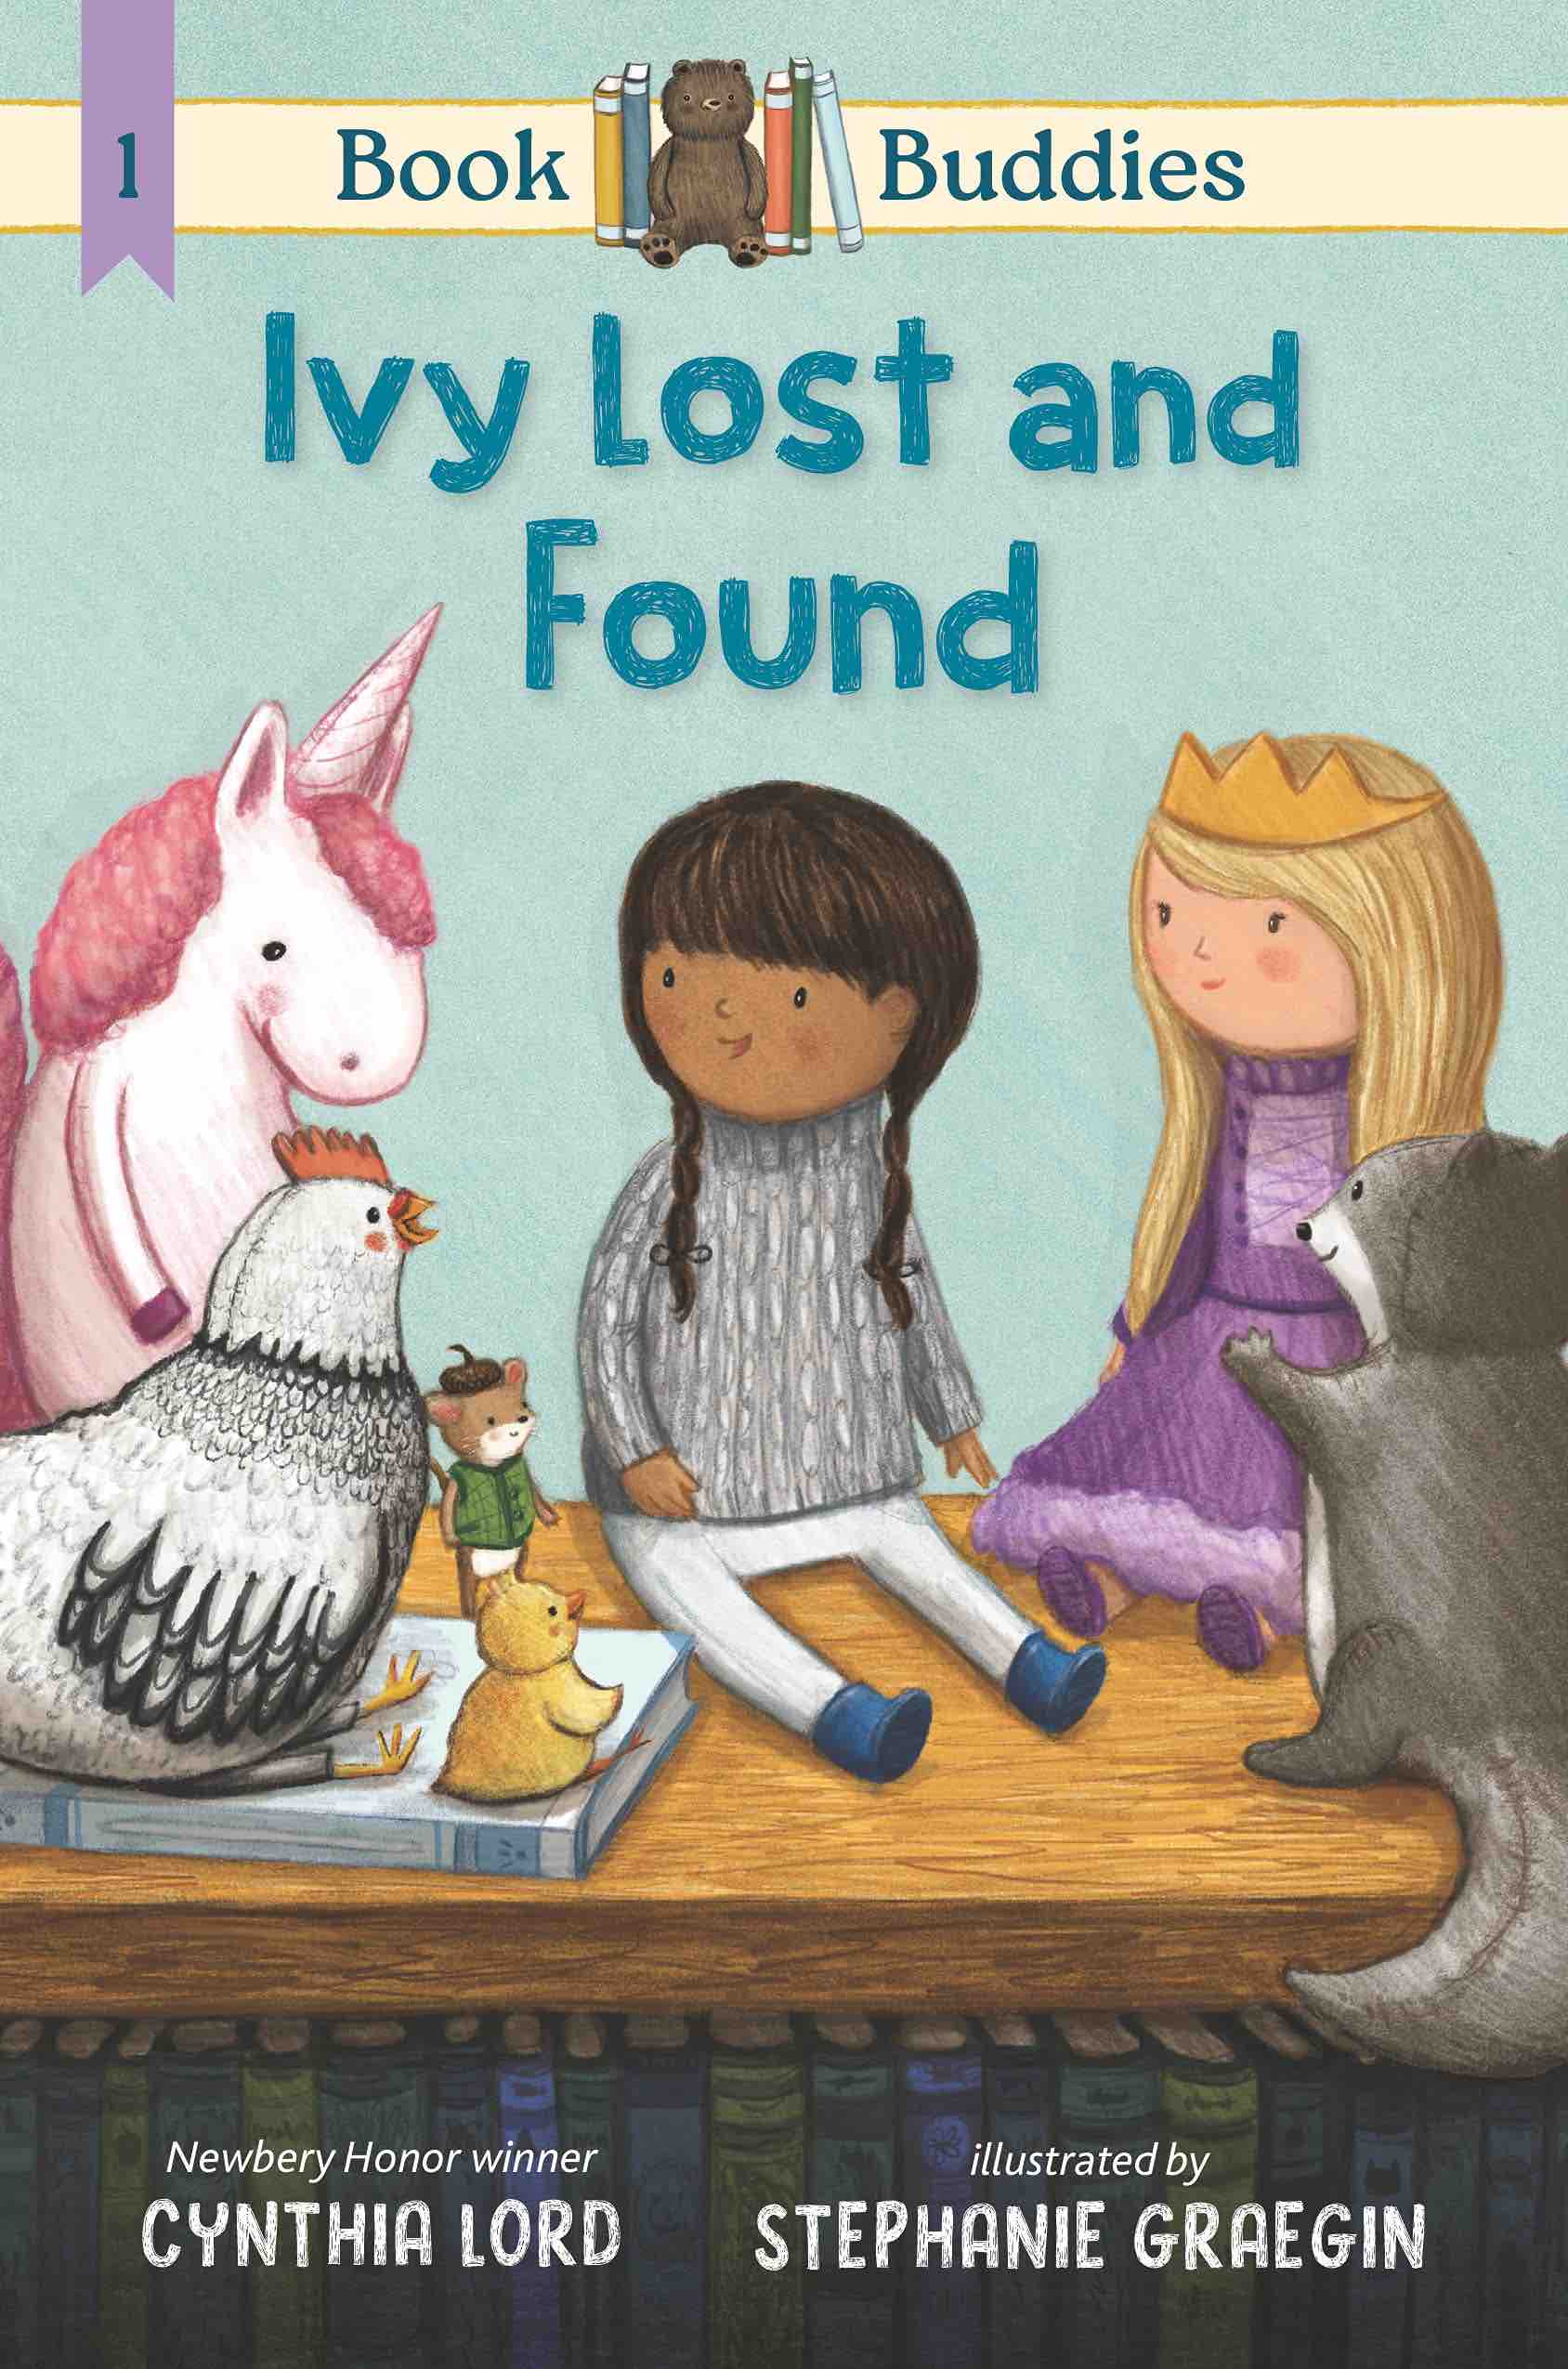 Book Buddies- Ivy Lost and Found